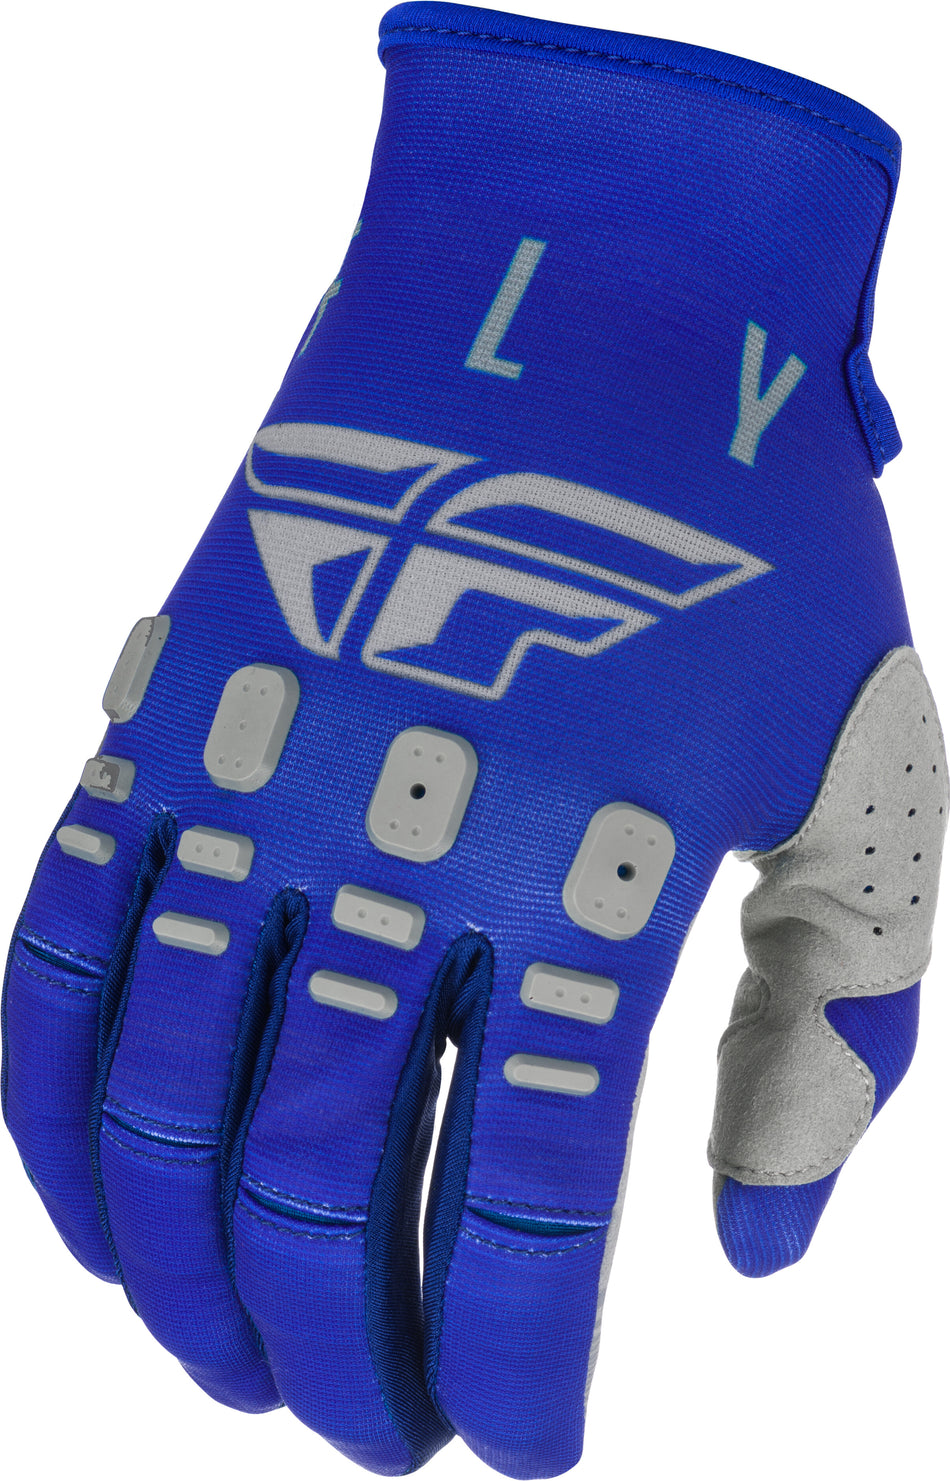 FLY RACING Youth Kinetic K121 Gloves Blue/Navy/Grey Sz 06 374-41106